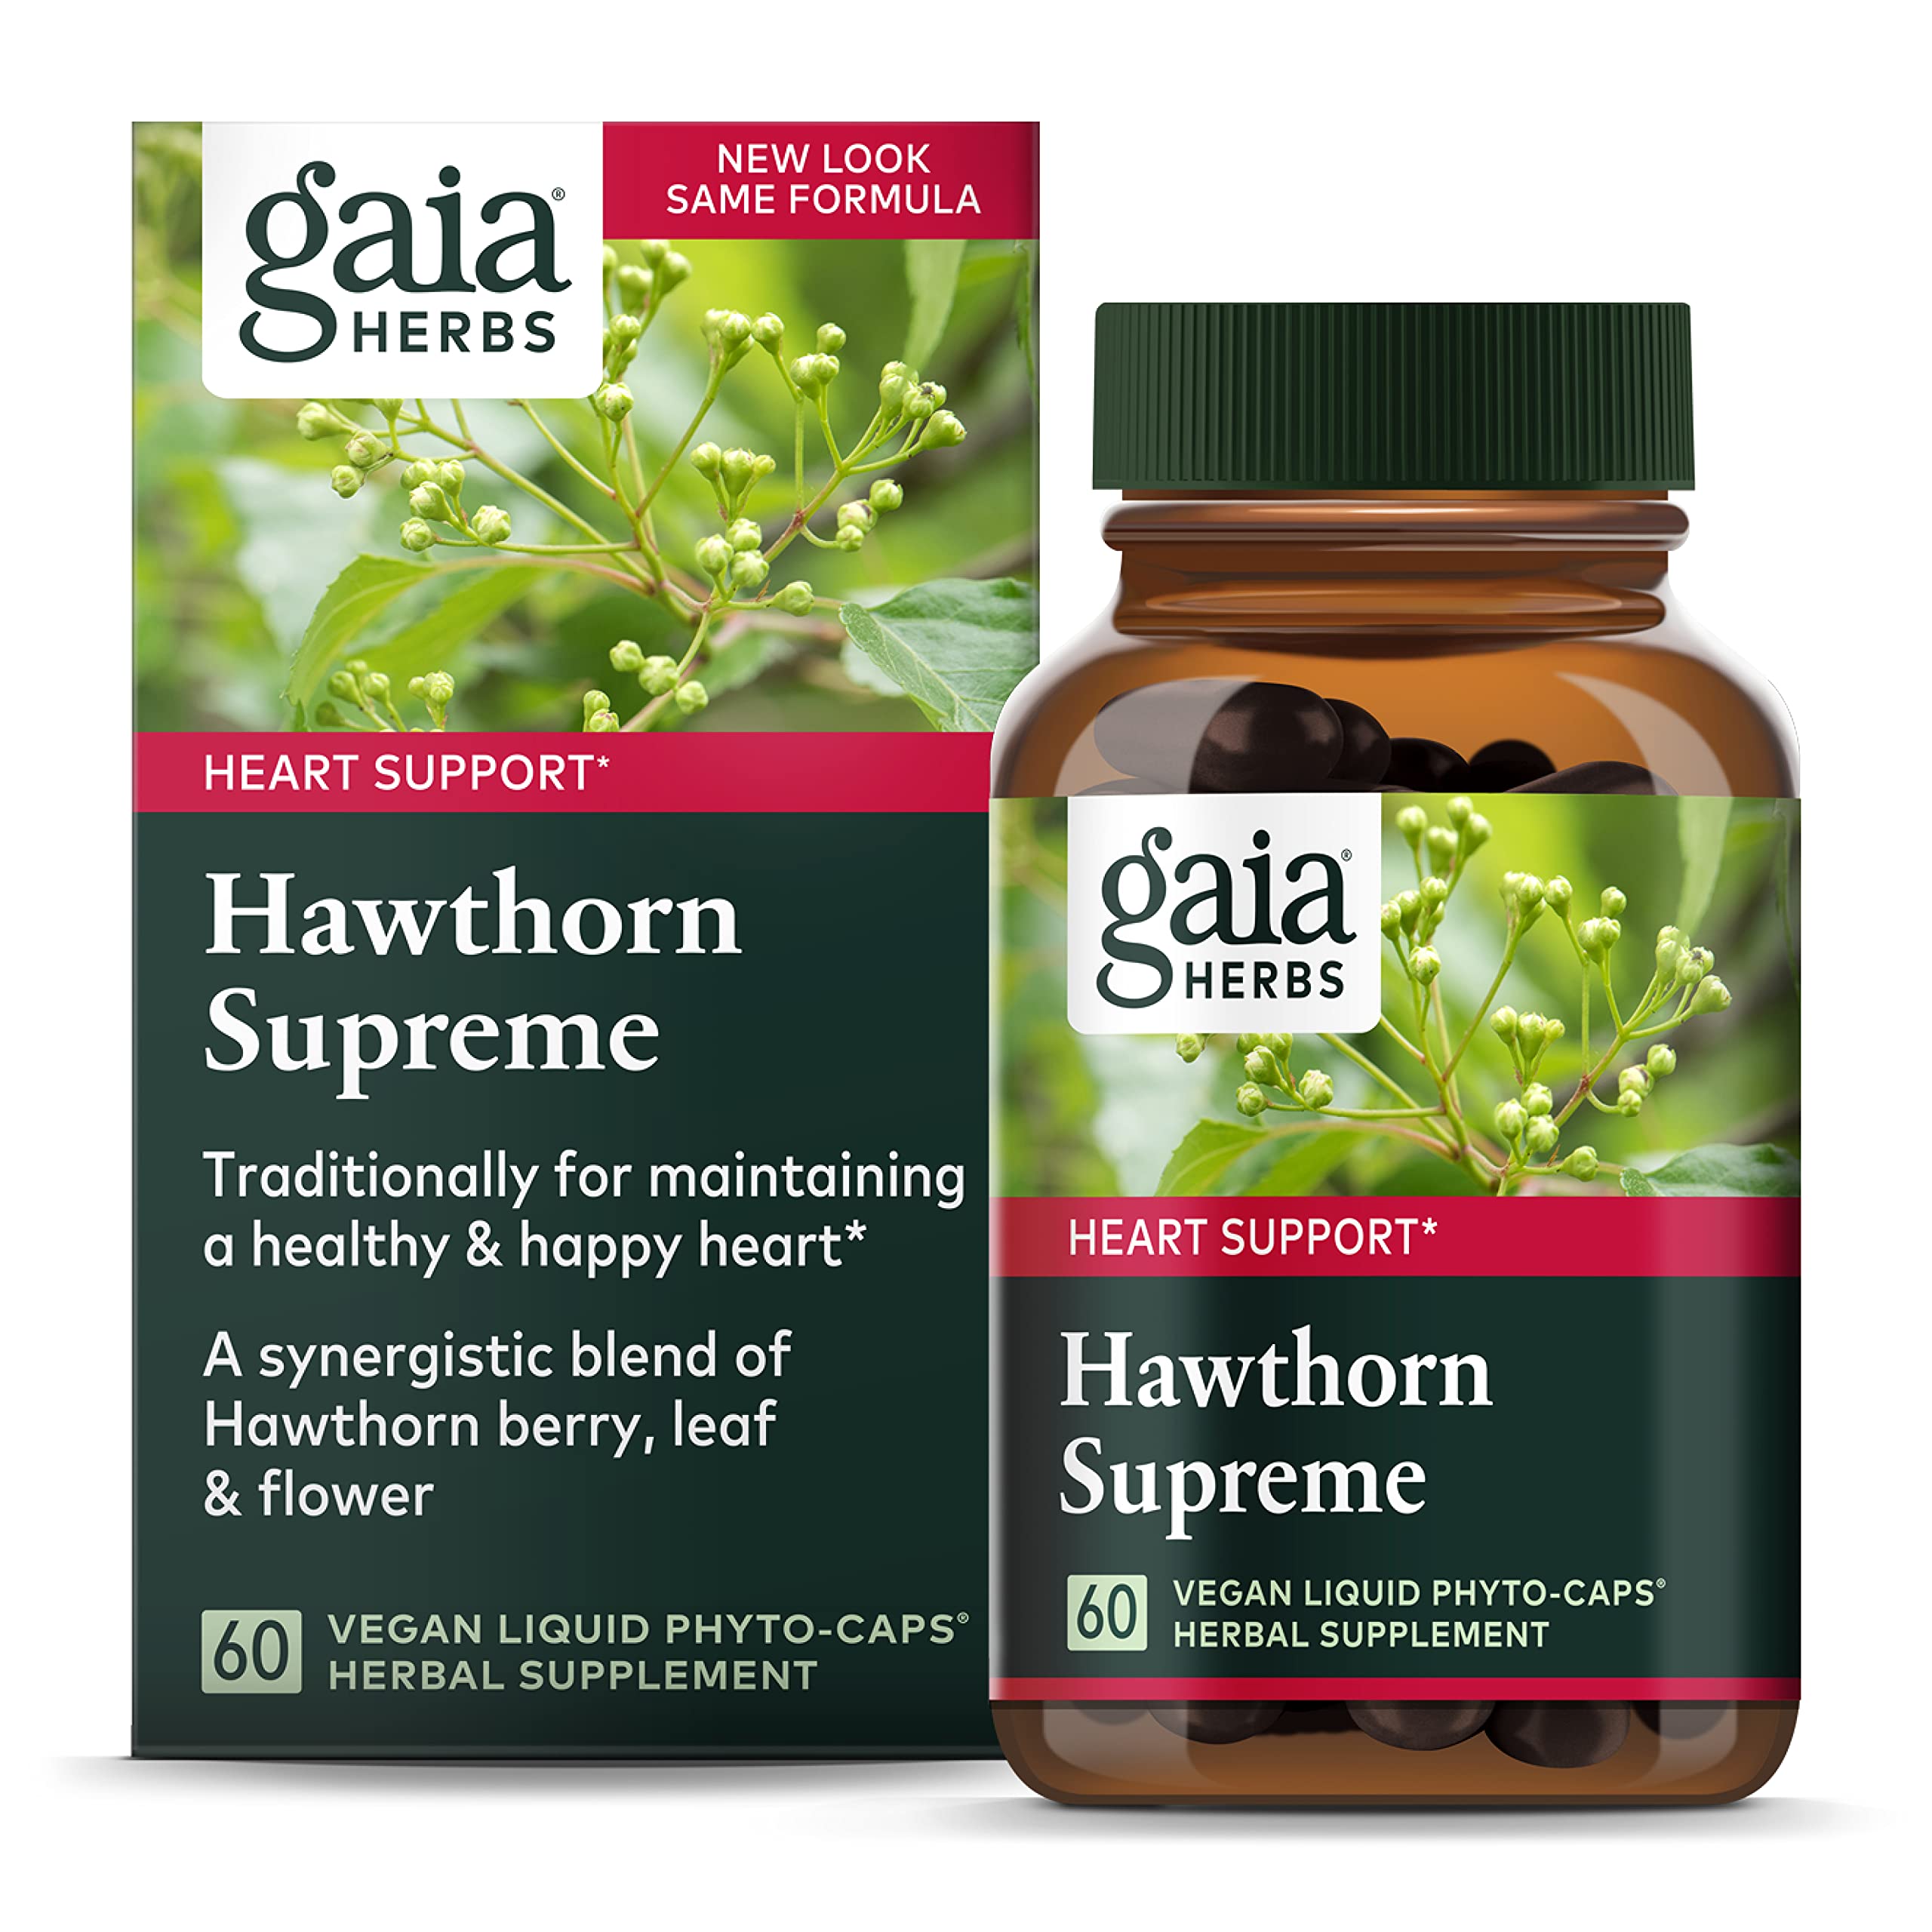 Gaia Herbs Hawthorn Supreme - Hawthorn Berry Supplement to Support Heart Health - for Use at Every Age and Stage to Sustain and Support The Heart - 60 Vegan Liquid Phyto-Capsules (30-Day Supply)